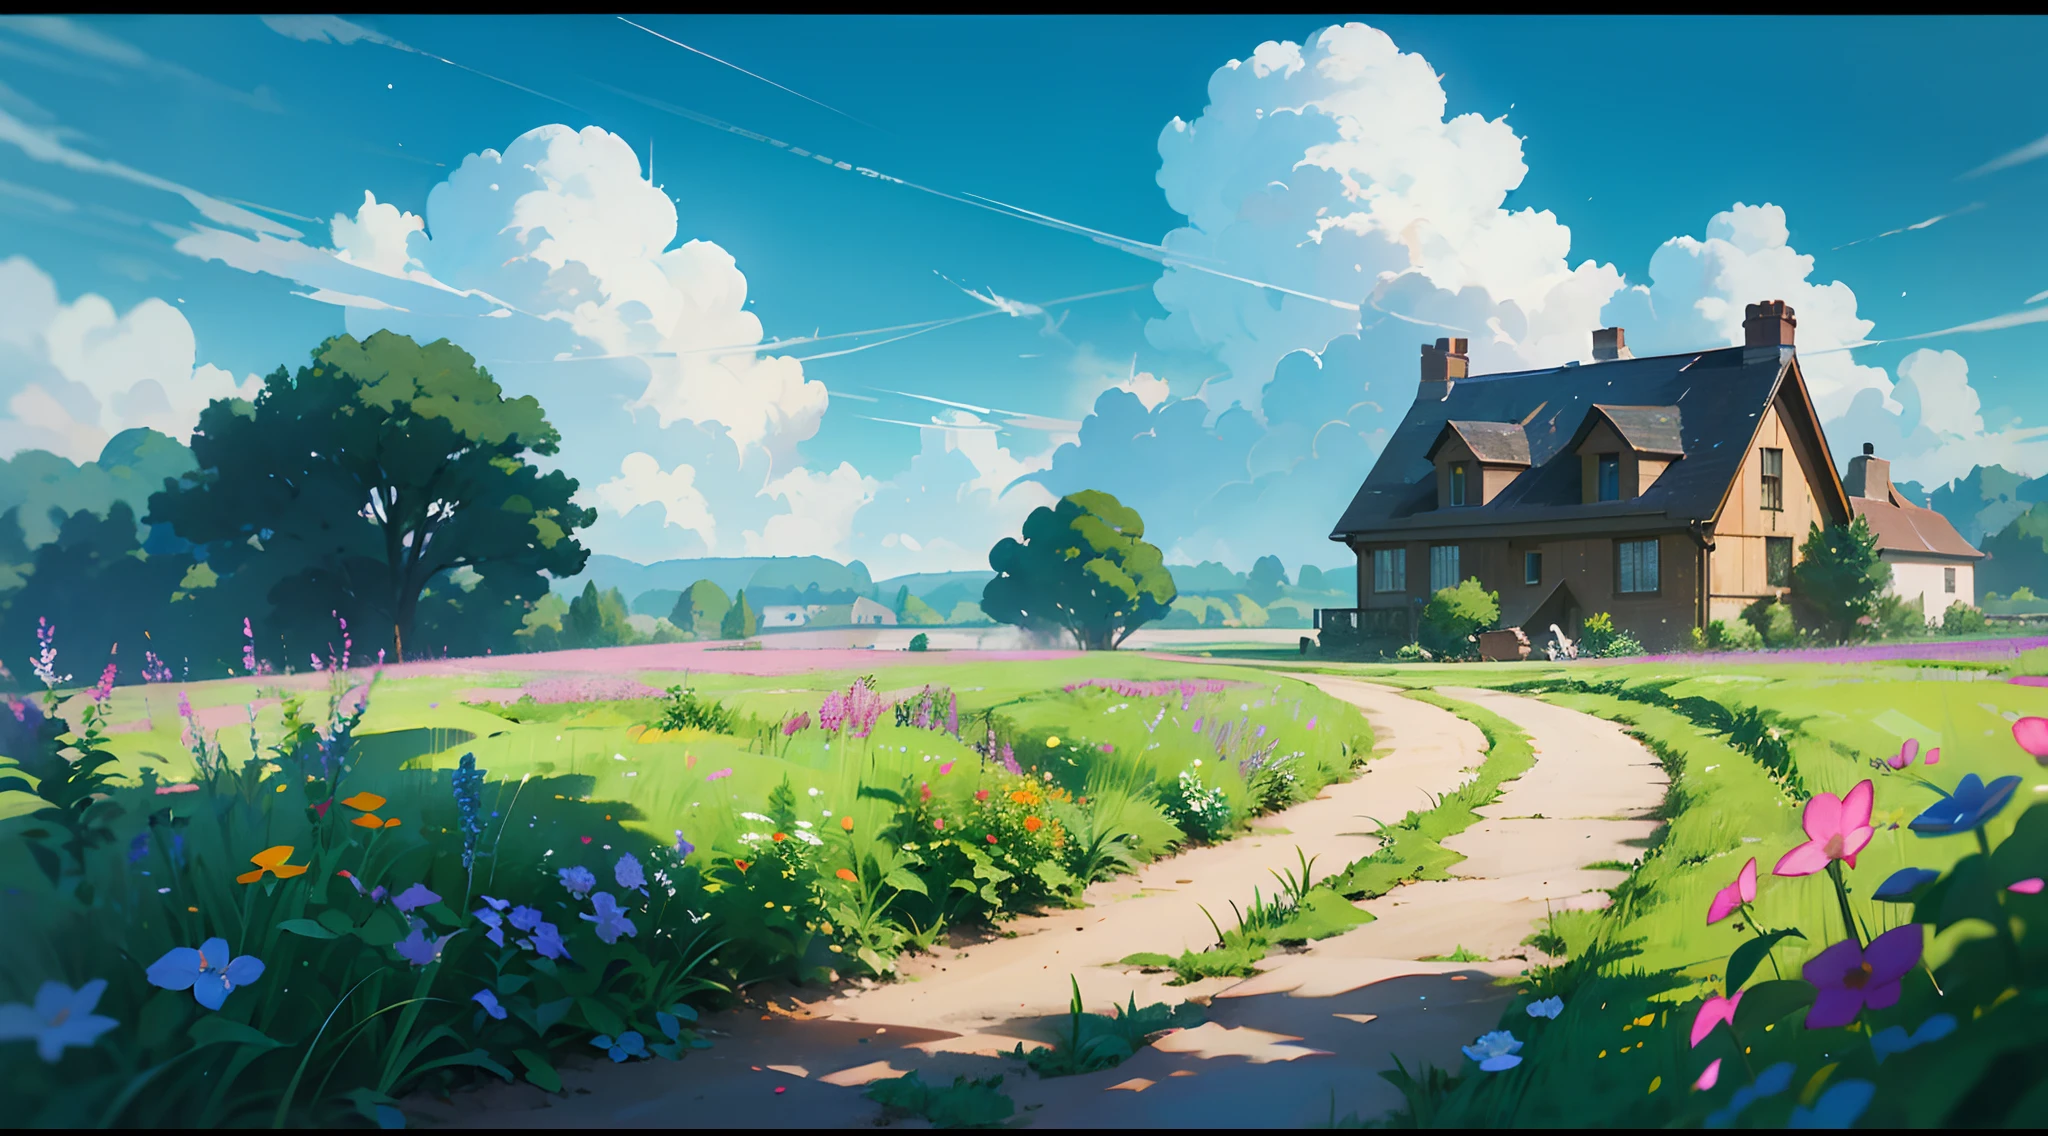 A lot of country cottages, summer, meadows, small flowers, countryside is rushing, there are many kittens on the road, heaven, big clouds, blue sky, hot weather, HD detail, hyper-detail, cinematic, surrealism, soft light, deep field focus bokeh, ray tracing, surrealism. --v6